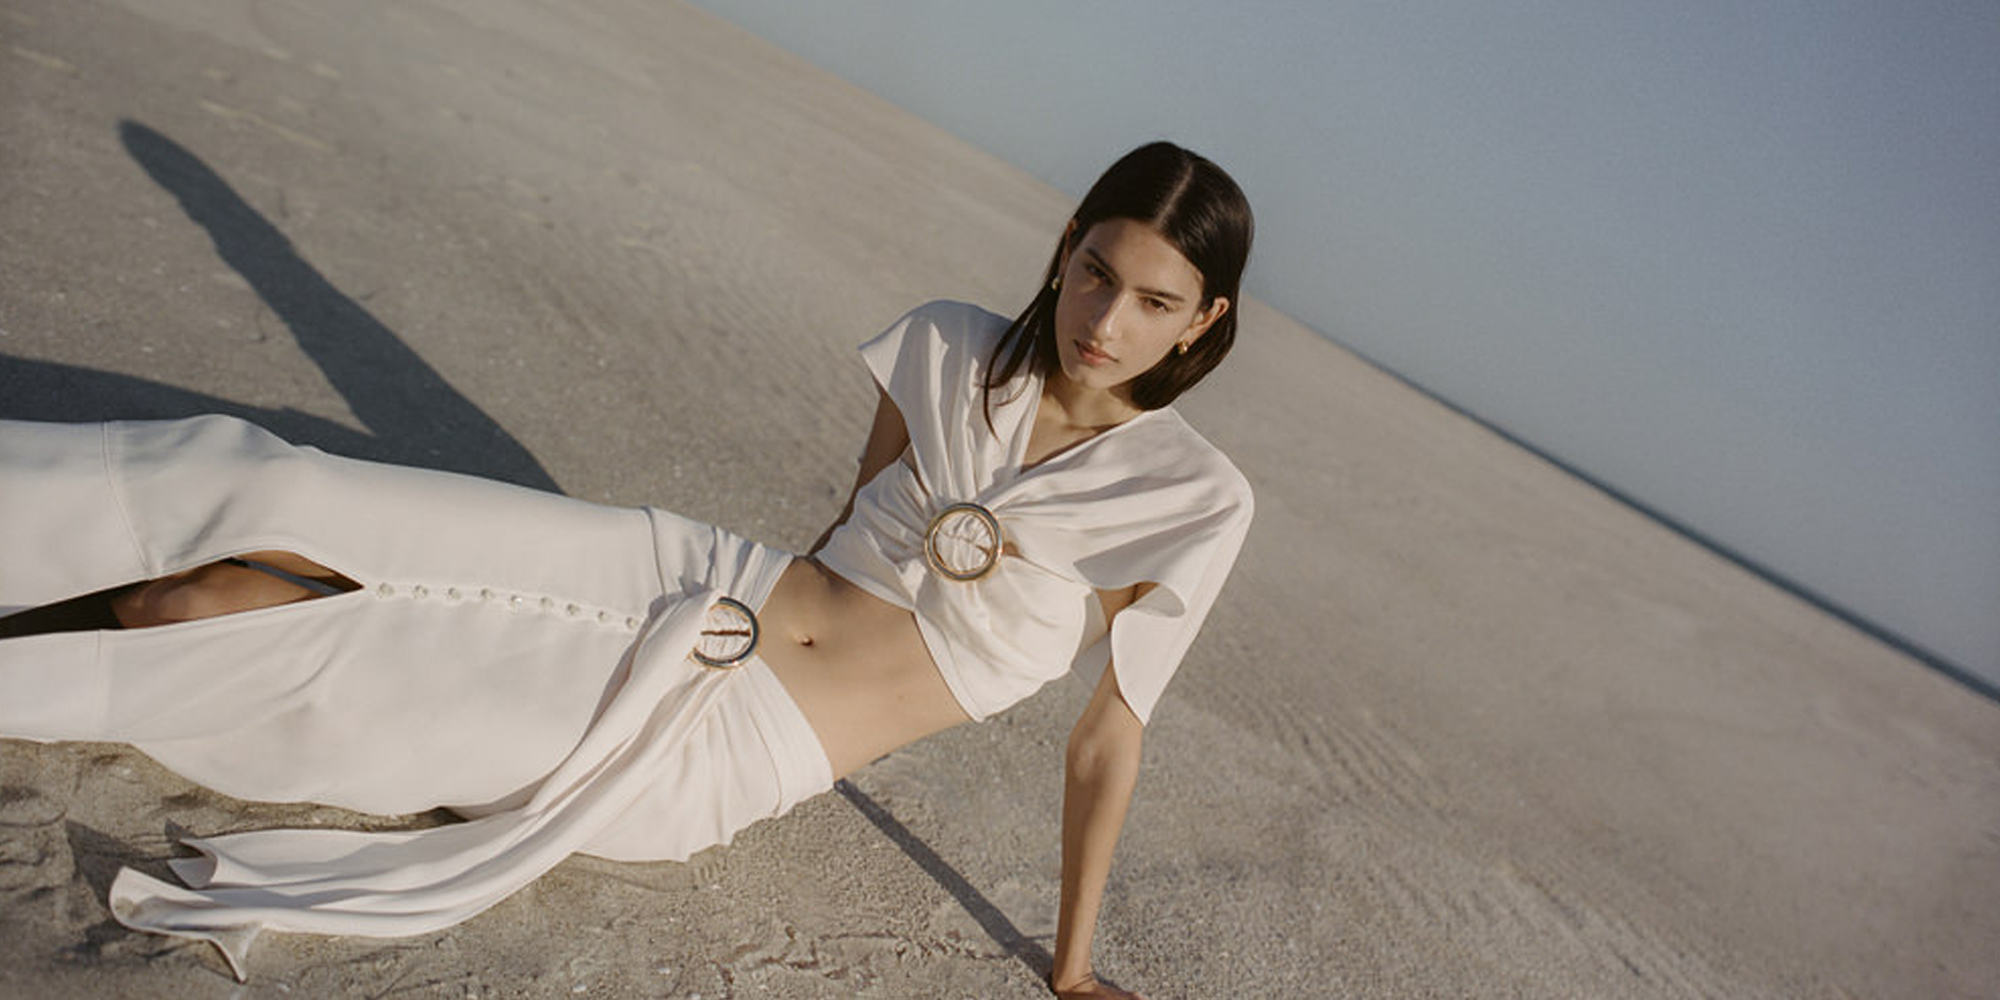 SHOP THE PACO RABANNE WINTER WHITES CAPSULE COLLECTION